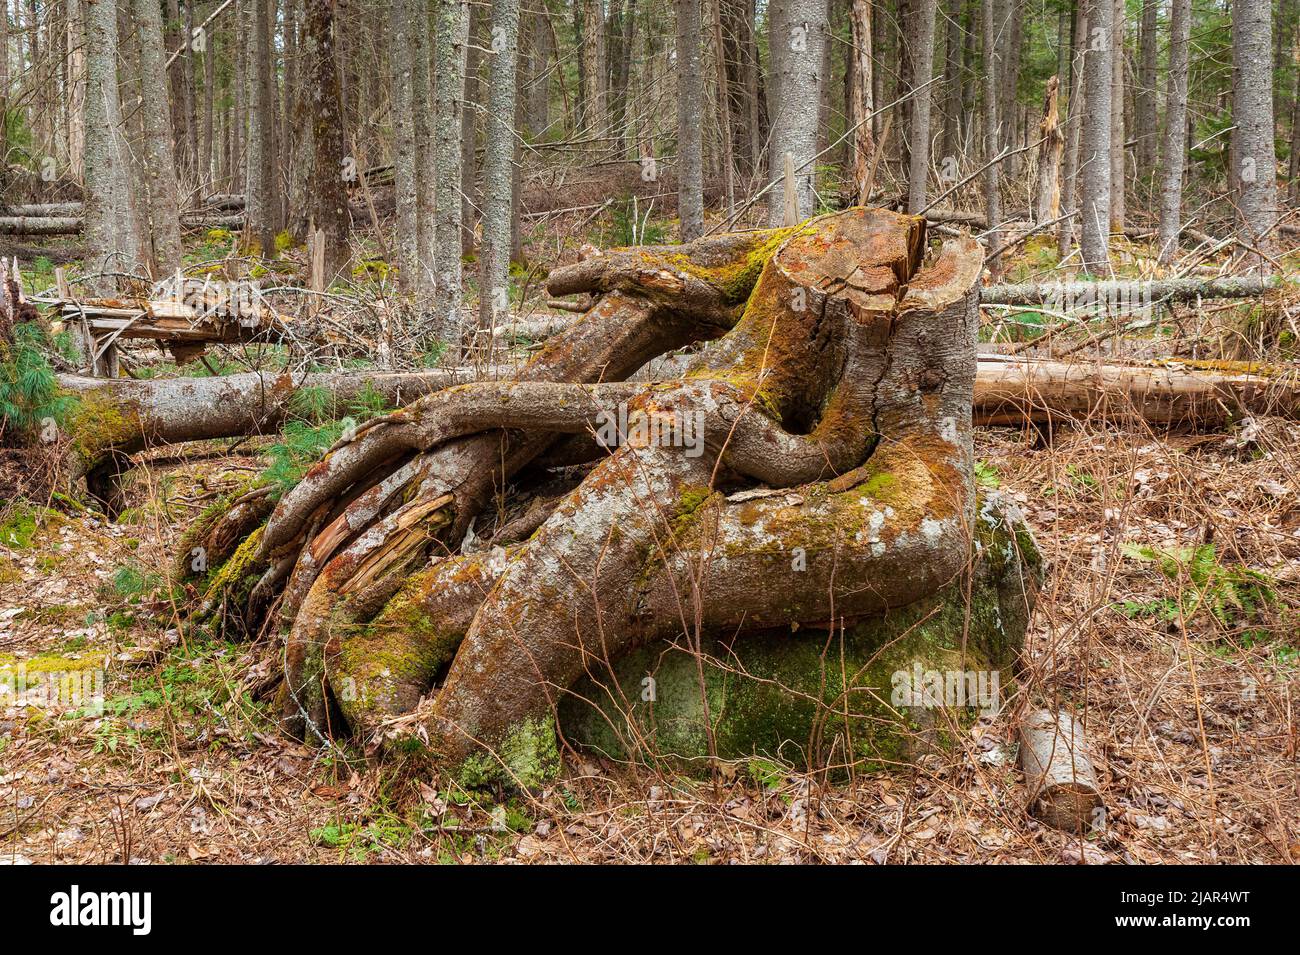 Entangled roods of a tree stump on top of a boulder, in a coniferous forests with fallen trees. Paul Smith's College Visitor Interpretive Center, NY. Stock Photo